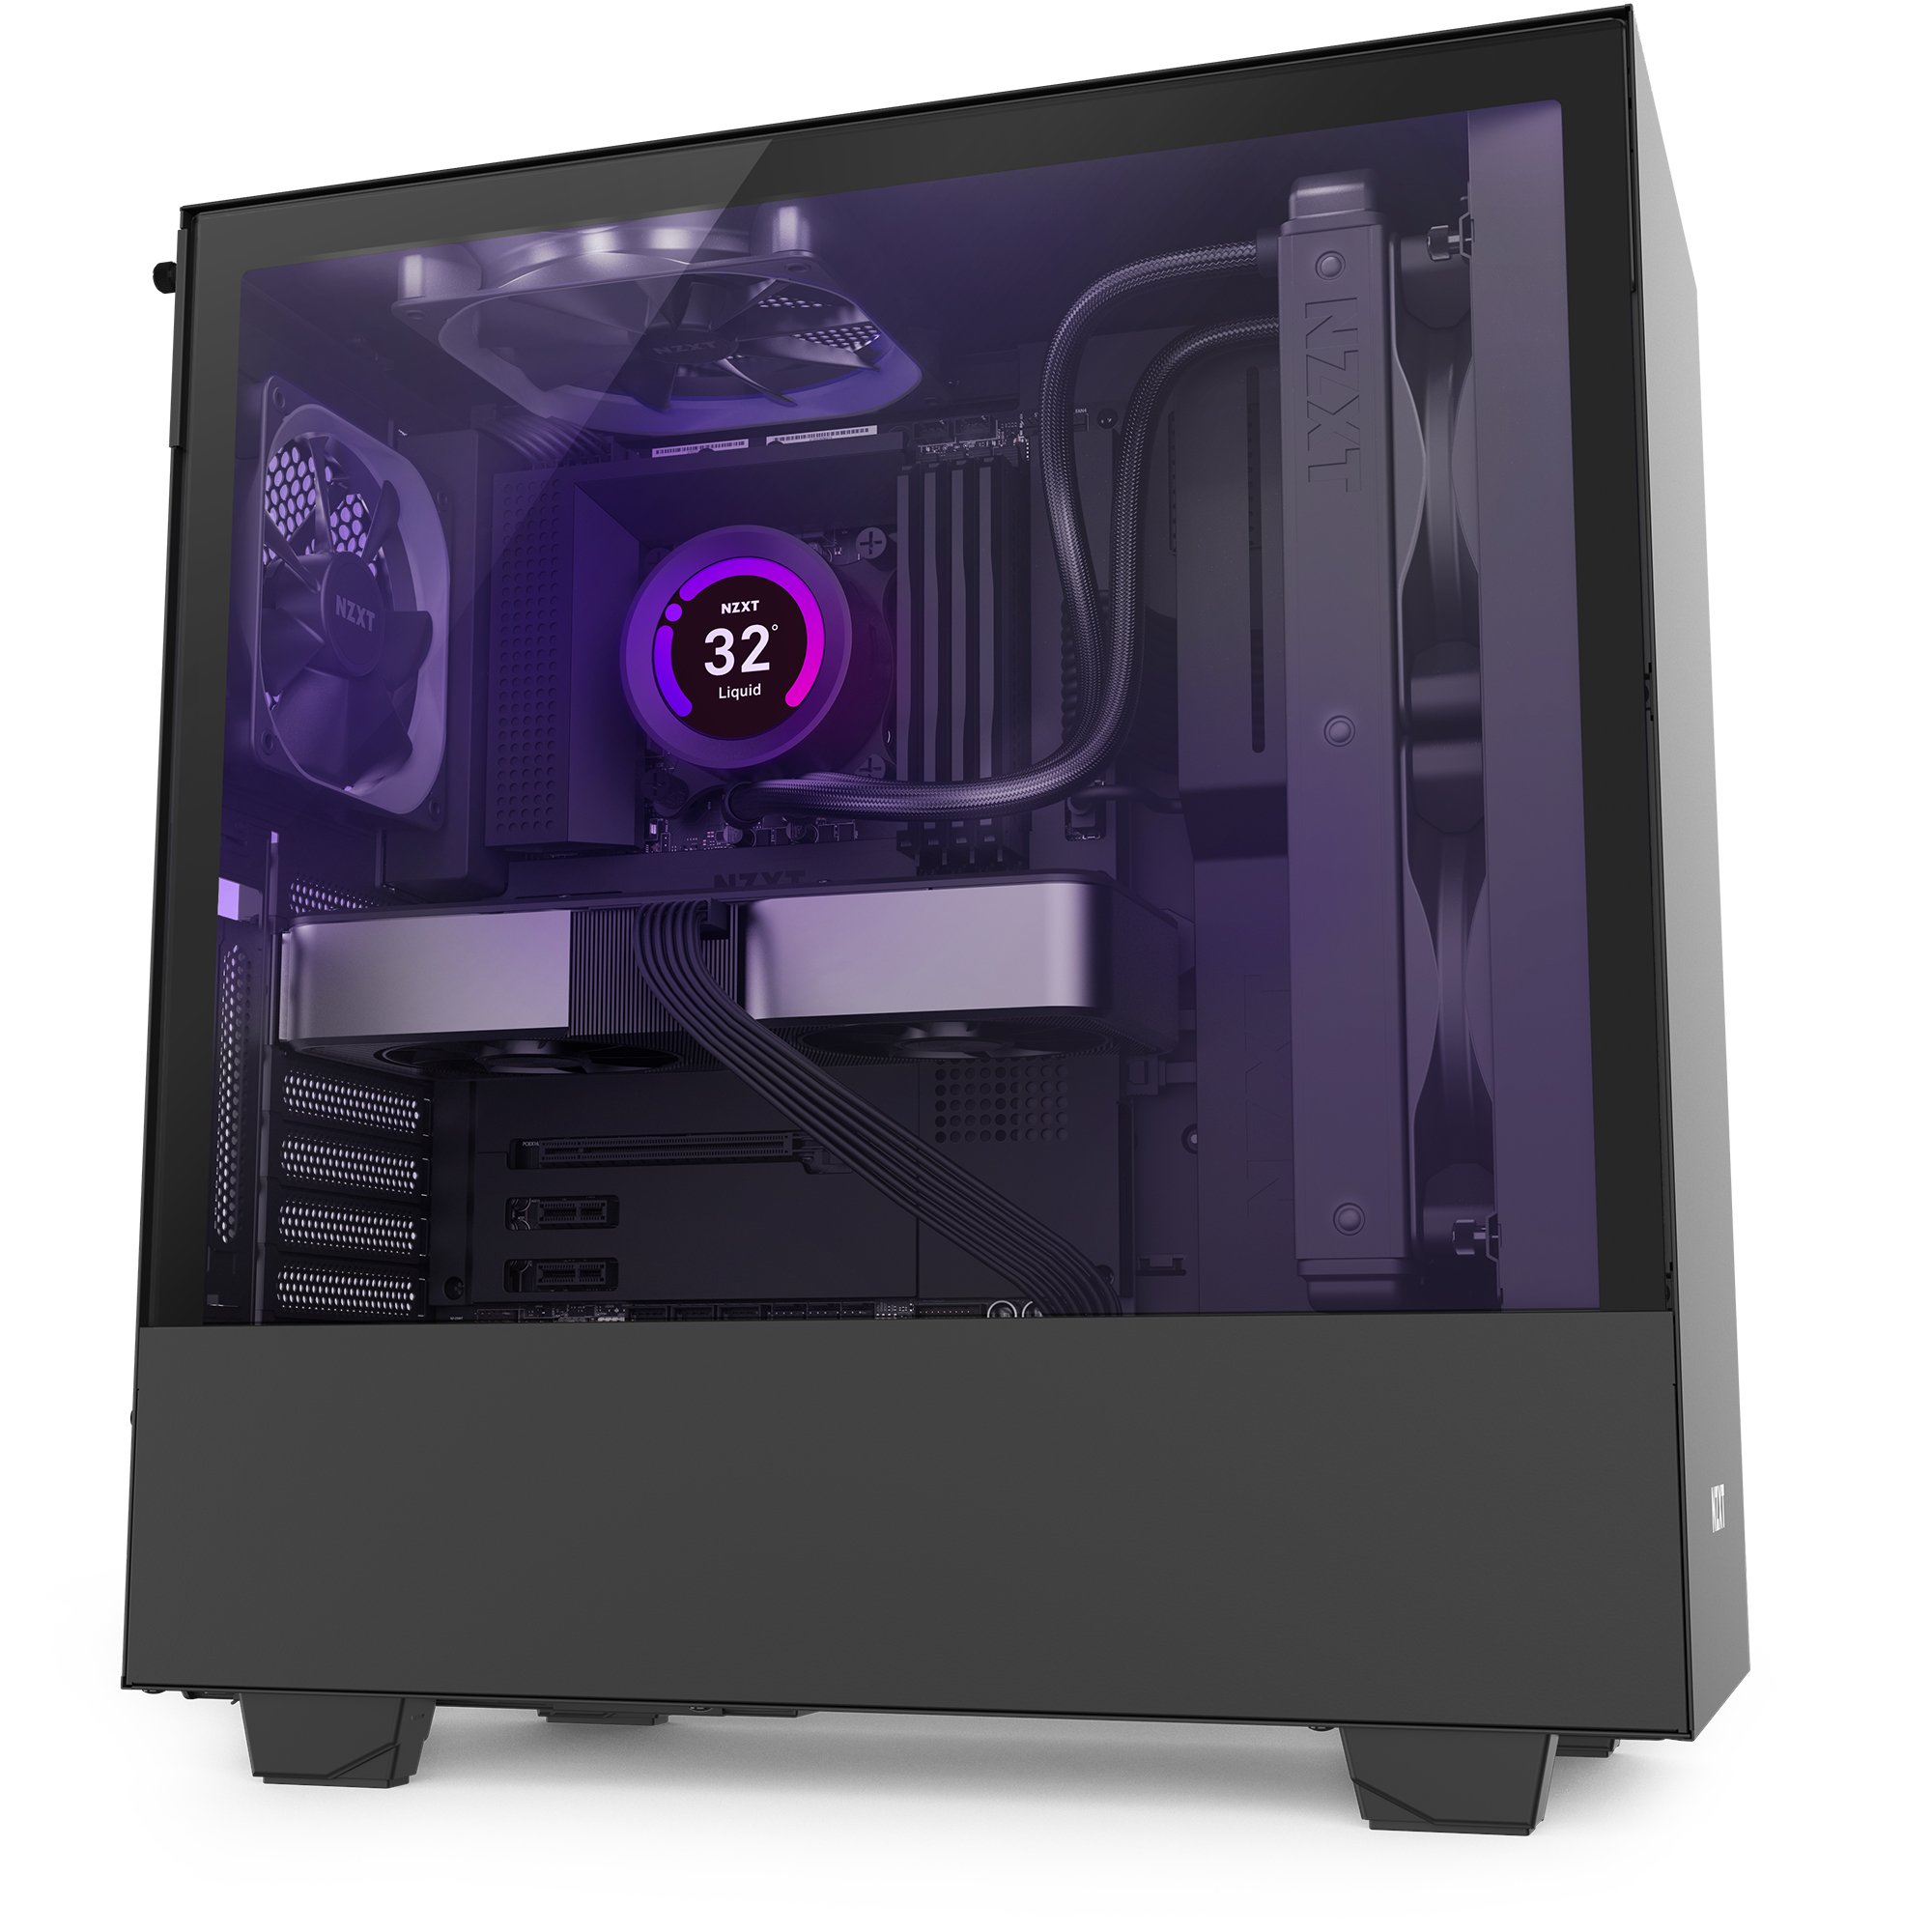 NZXT Announces the N7 Z590 Motherboard